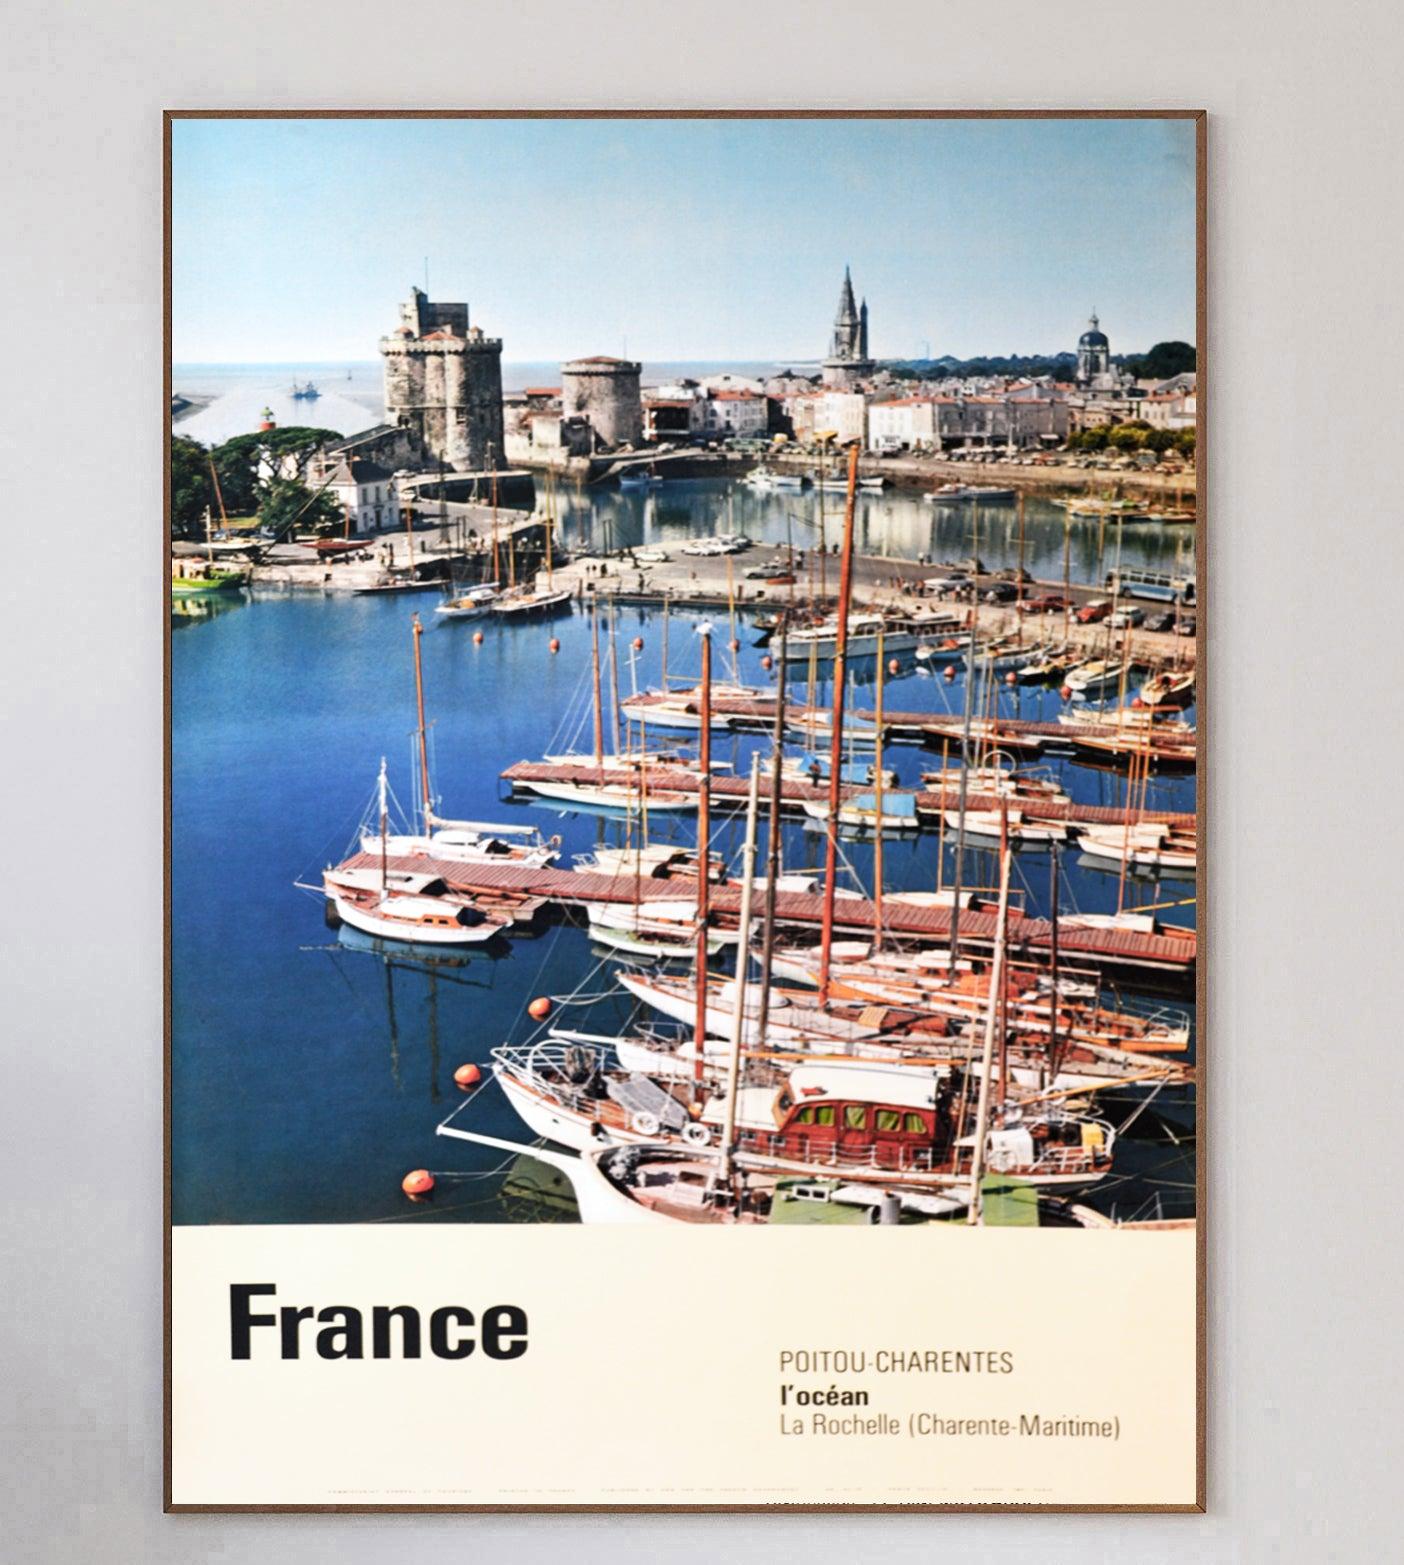 Wonderful poster promoting the region of Poitou Carantes on the South-Western coast of France. Printed in 1963 by Draeger, this original travel poster was created for the Tourism Office of France.

Depicting a sunny day on the La Rochelle port, this